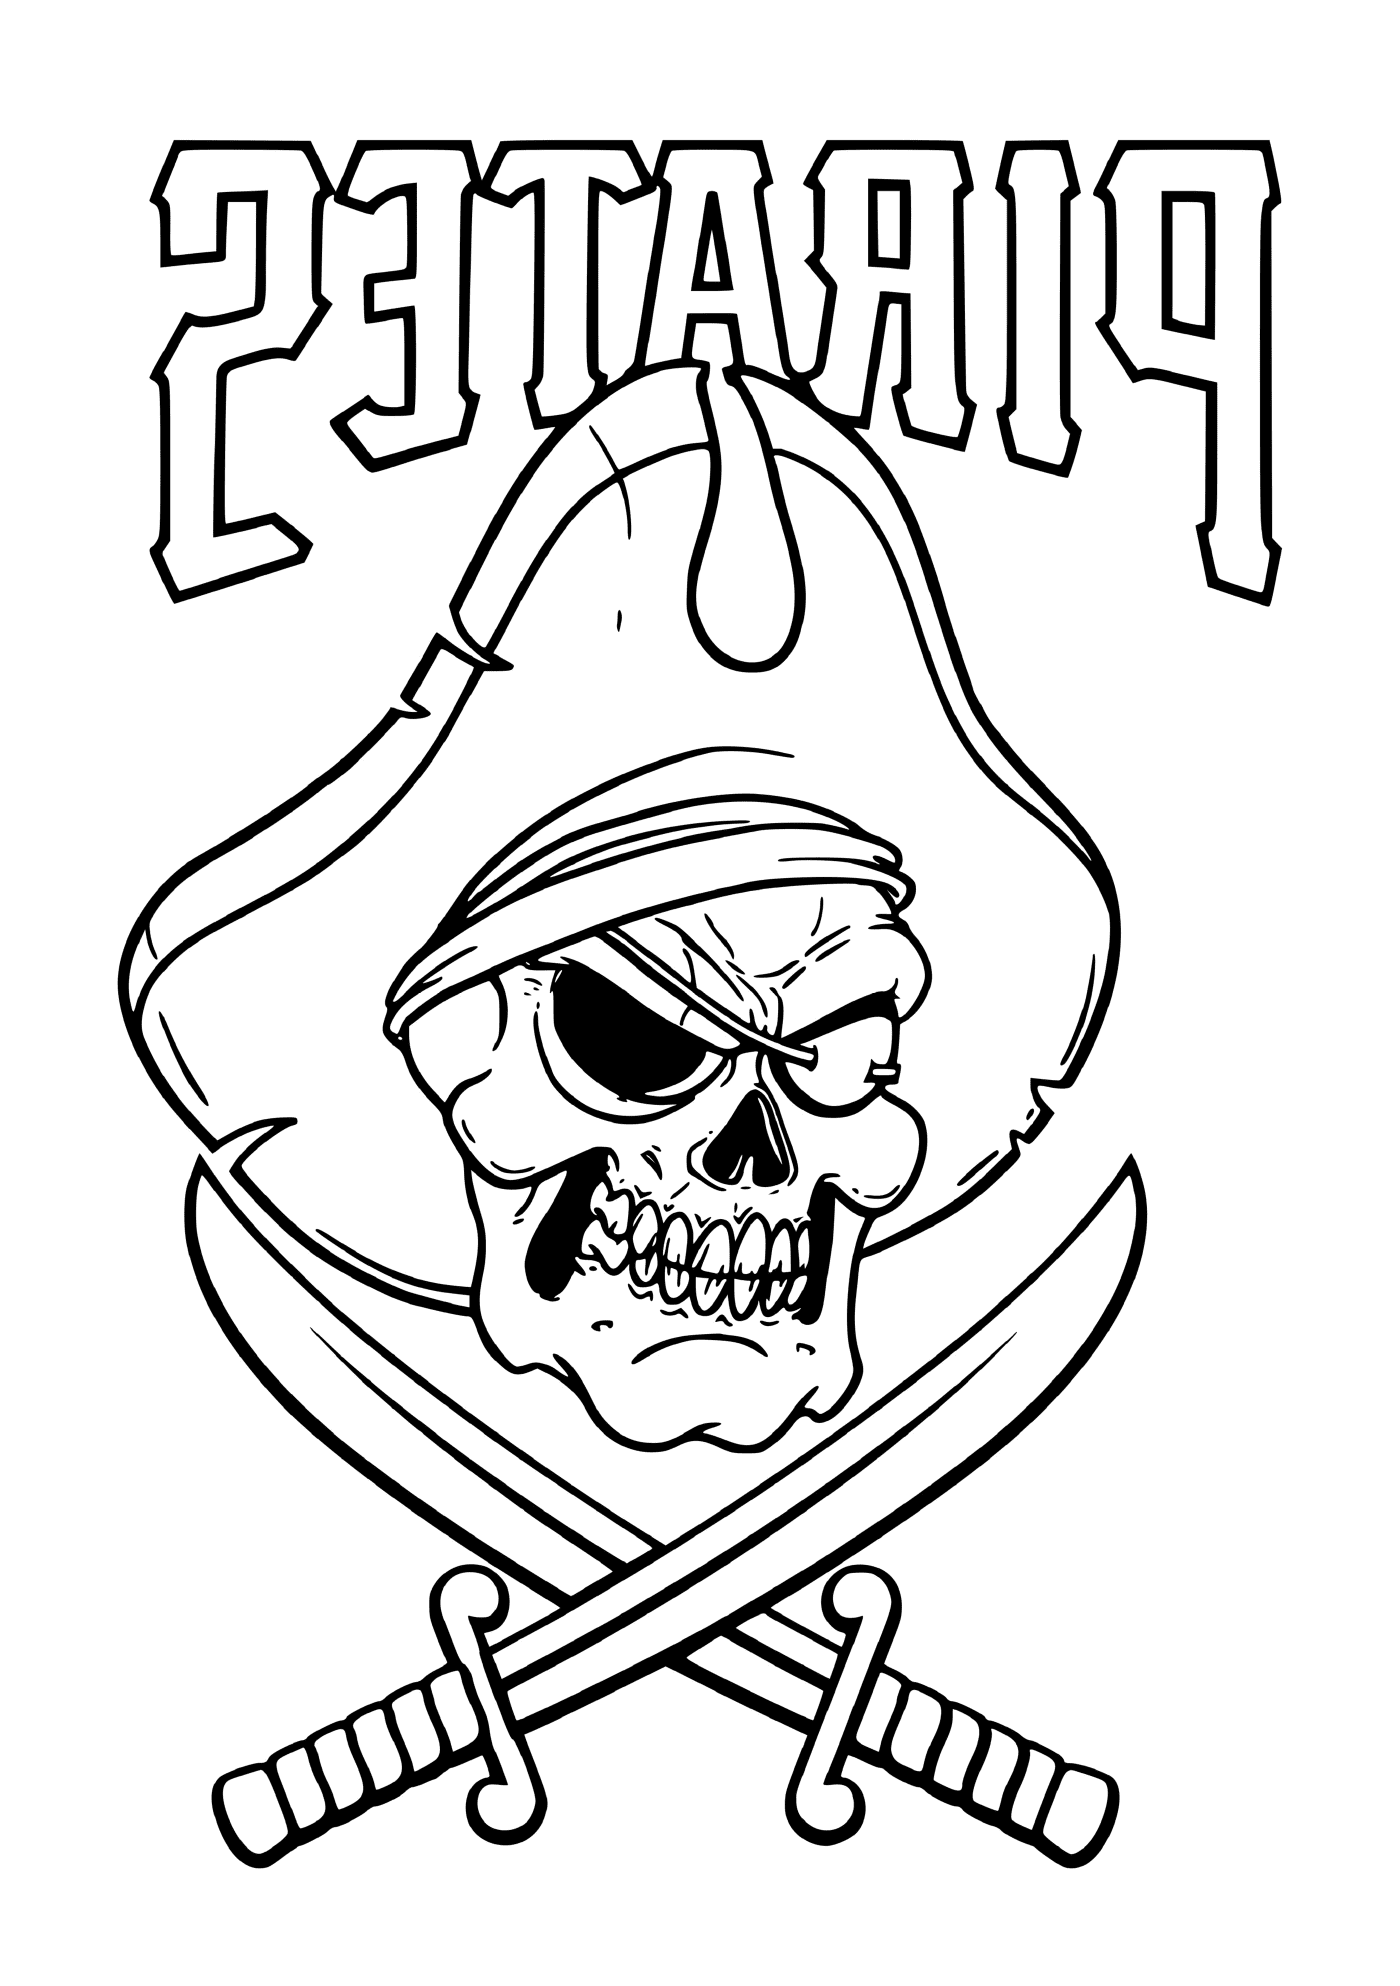  Pirate skeleton with hat and swords 